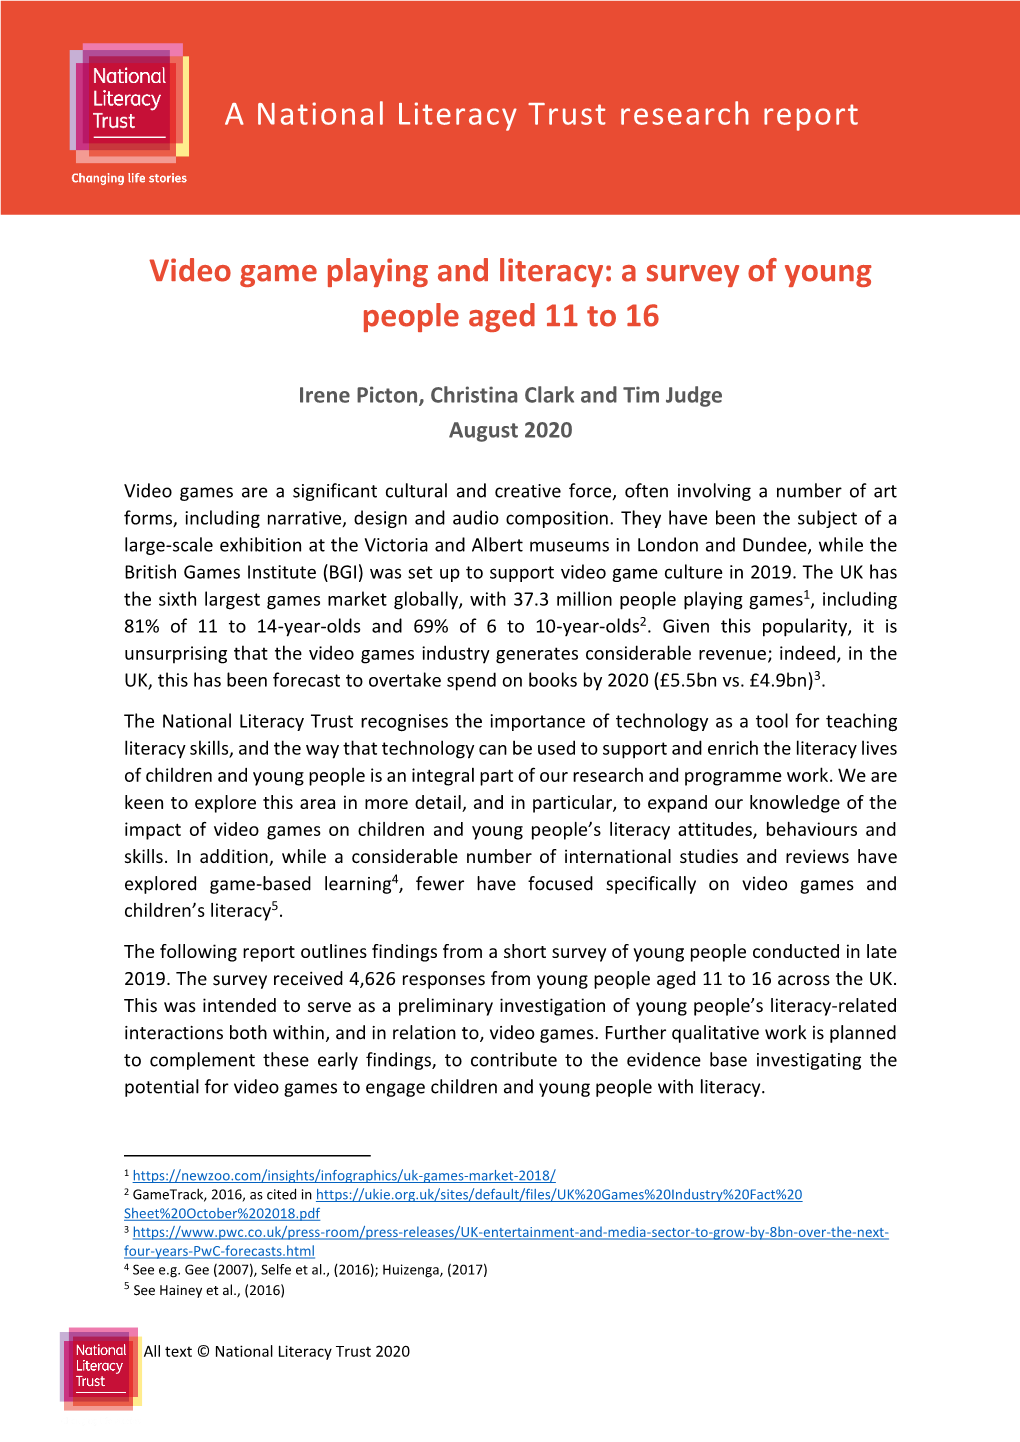 Video Game Playing and Literacy: a Survey of Young People Aged 11 to 16